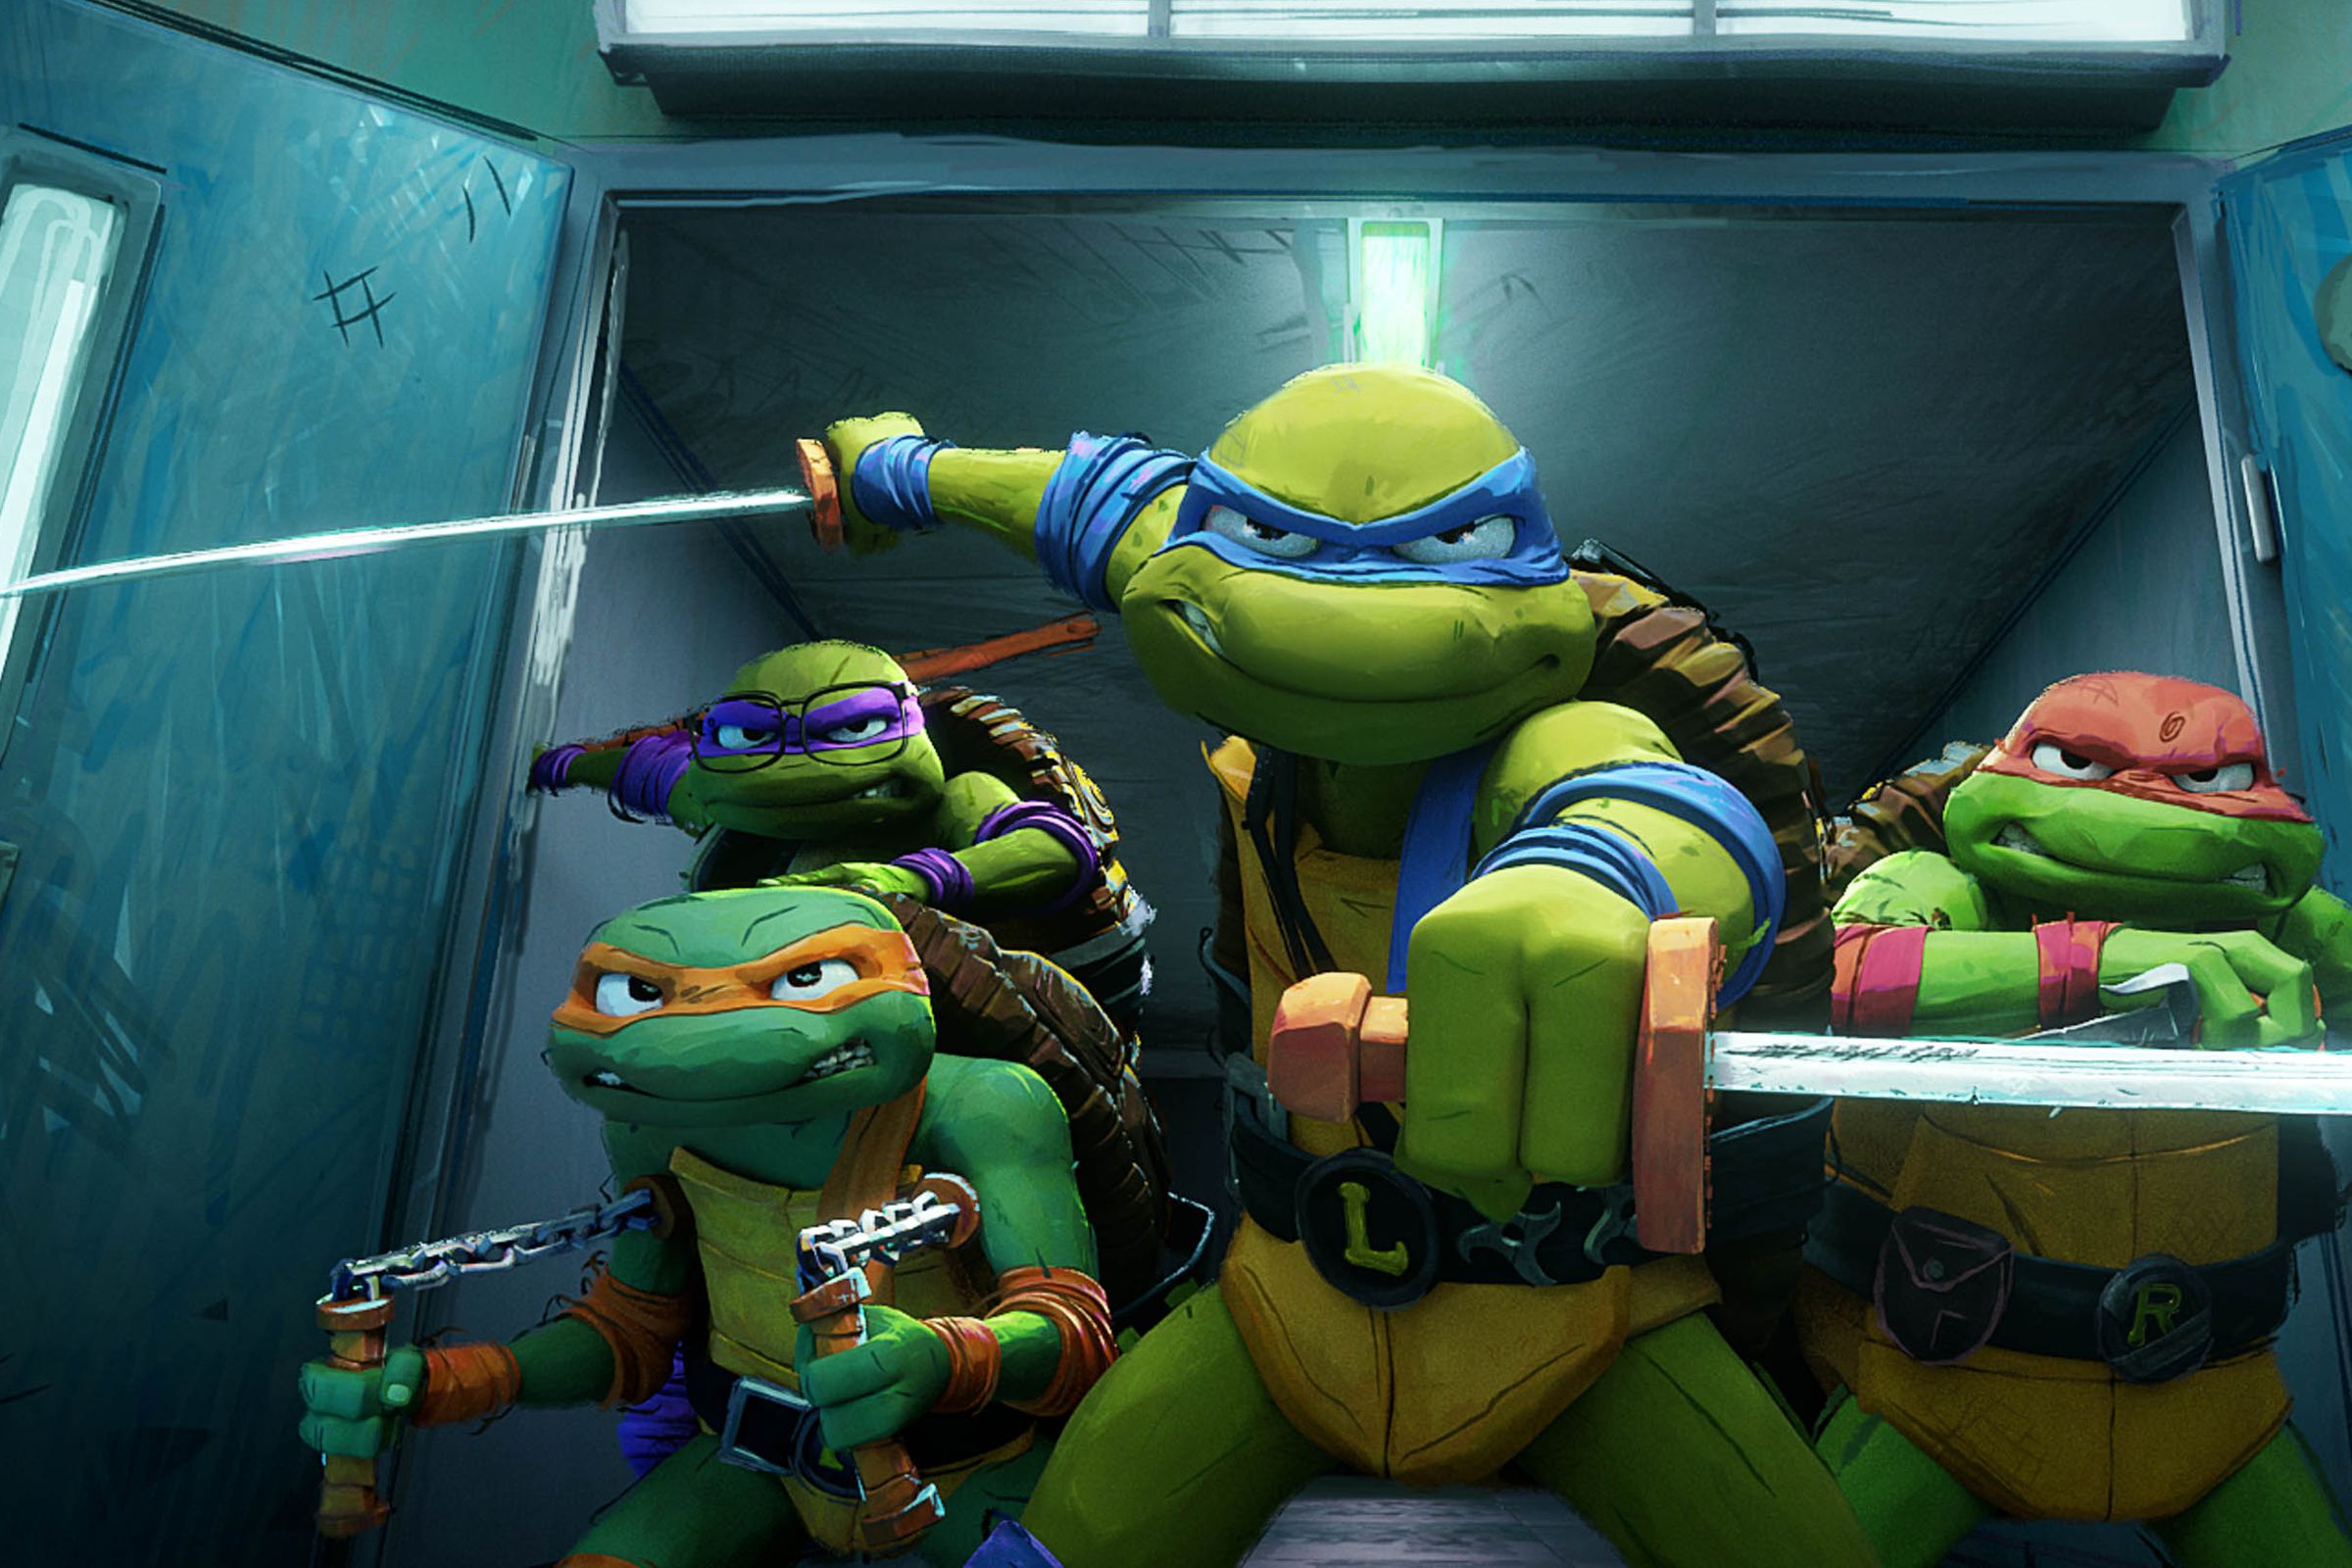 A group of humanoid turtles wearing masks, standing on their hind legs, and holding an assortment of ninja weapons.